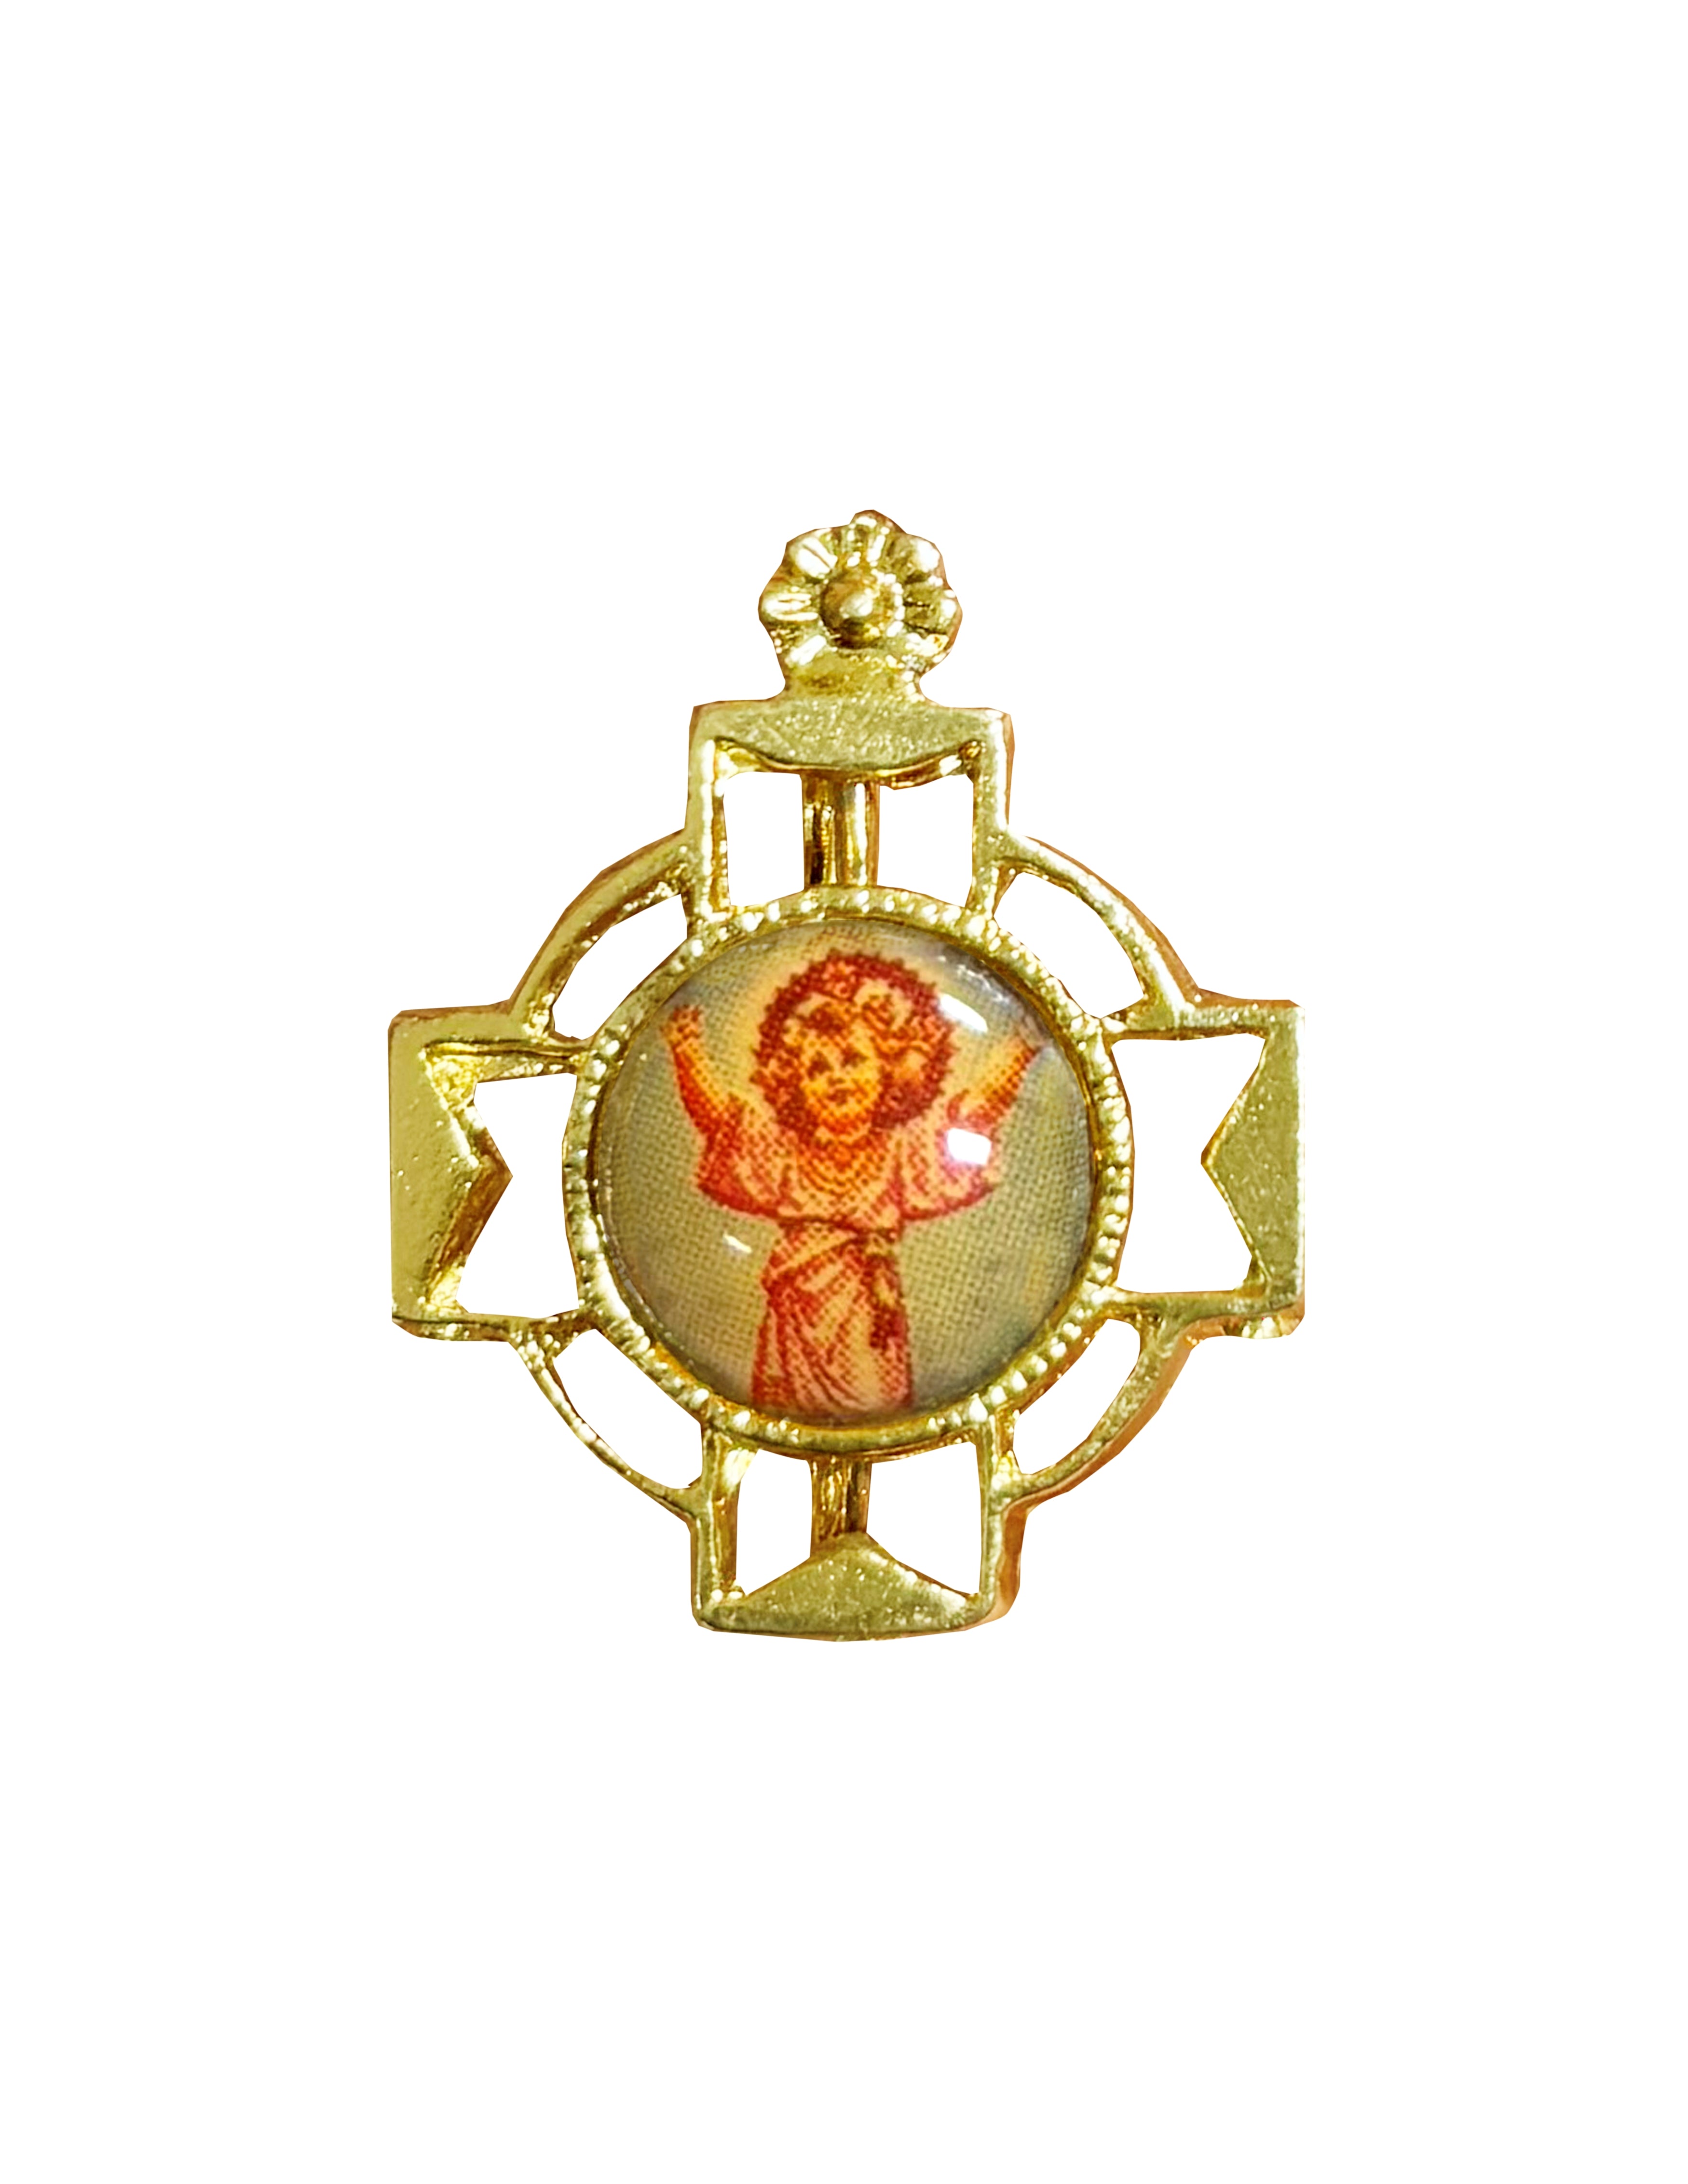 Lapel pin gold cross and enameled print